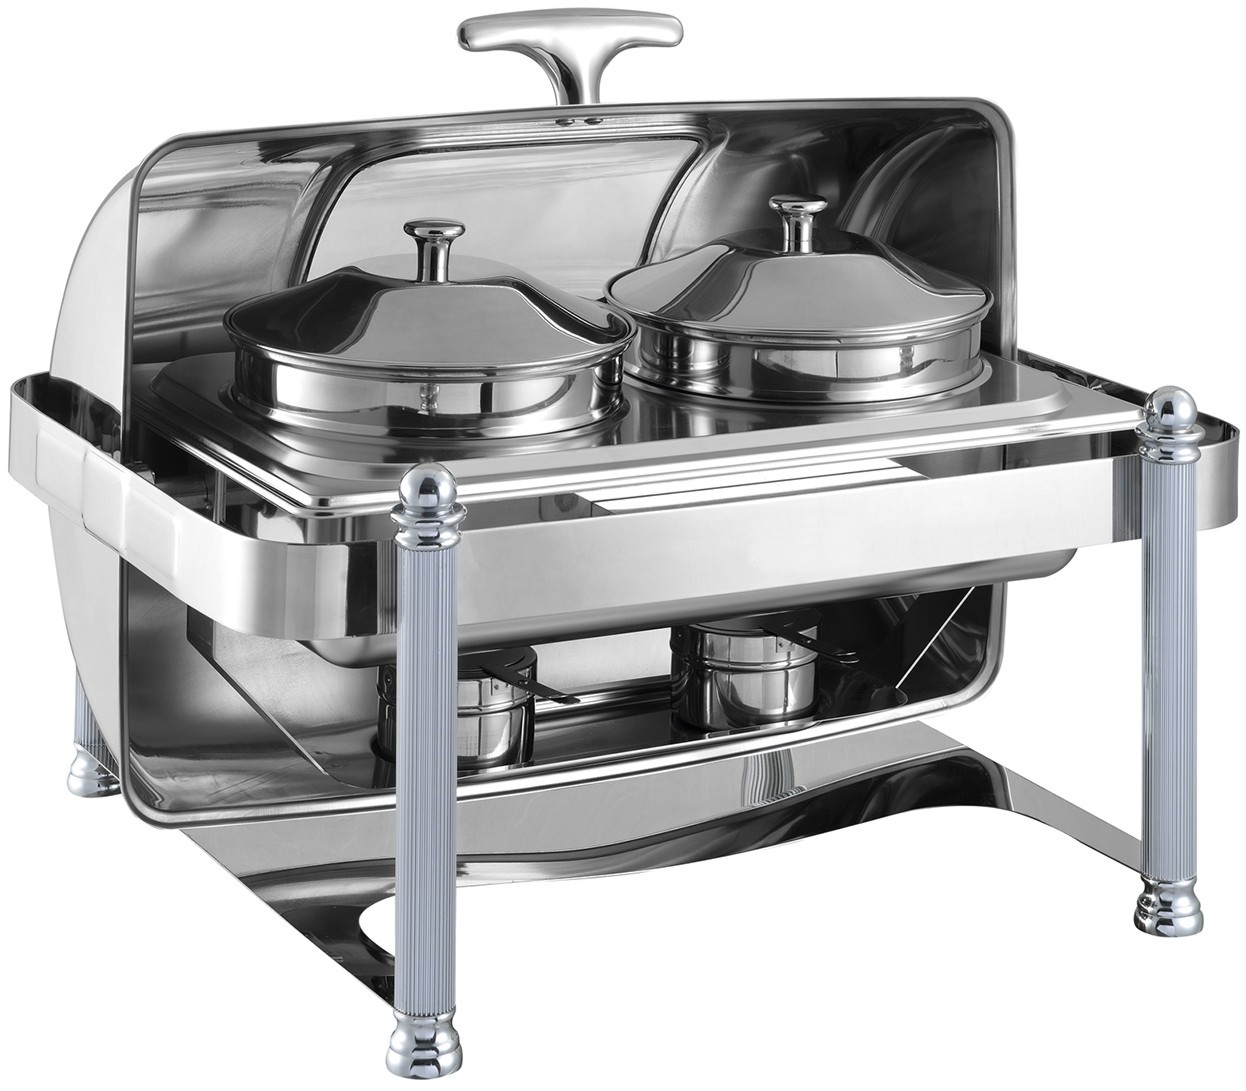 GRT-6508KS Stainless Steel Visible Window Round Chafing Dish 9L for Soup